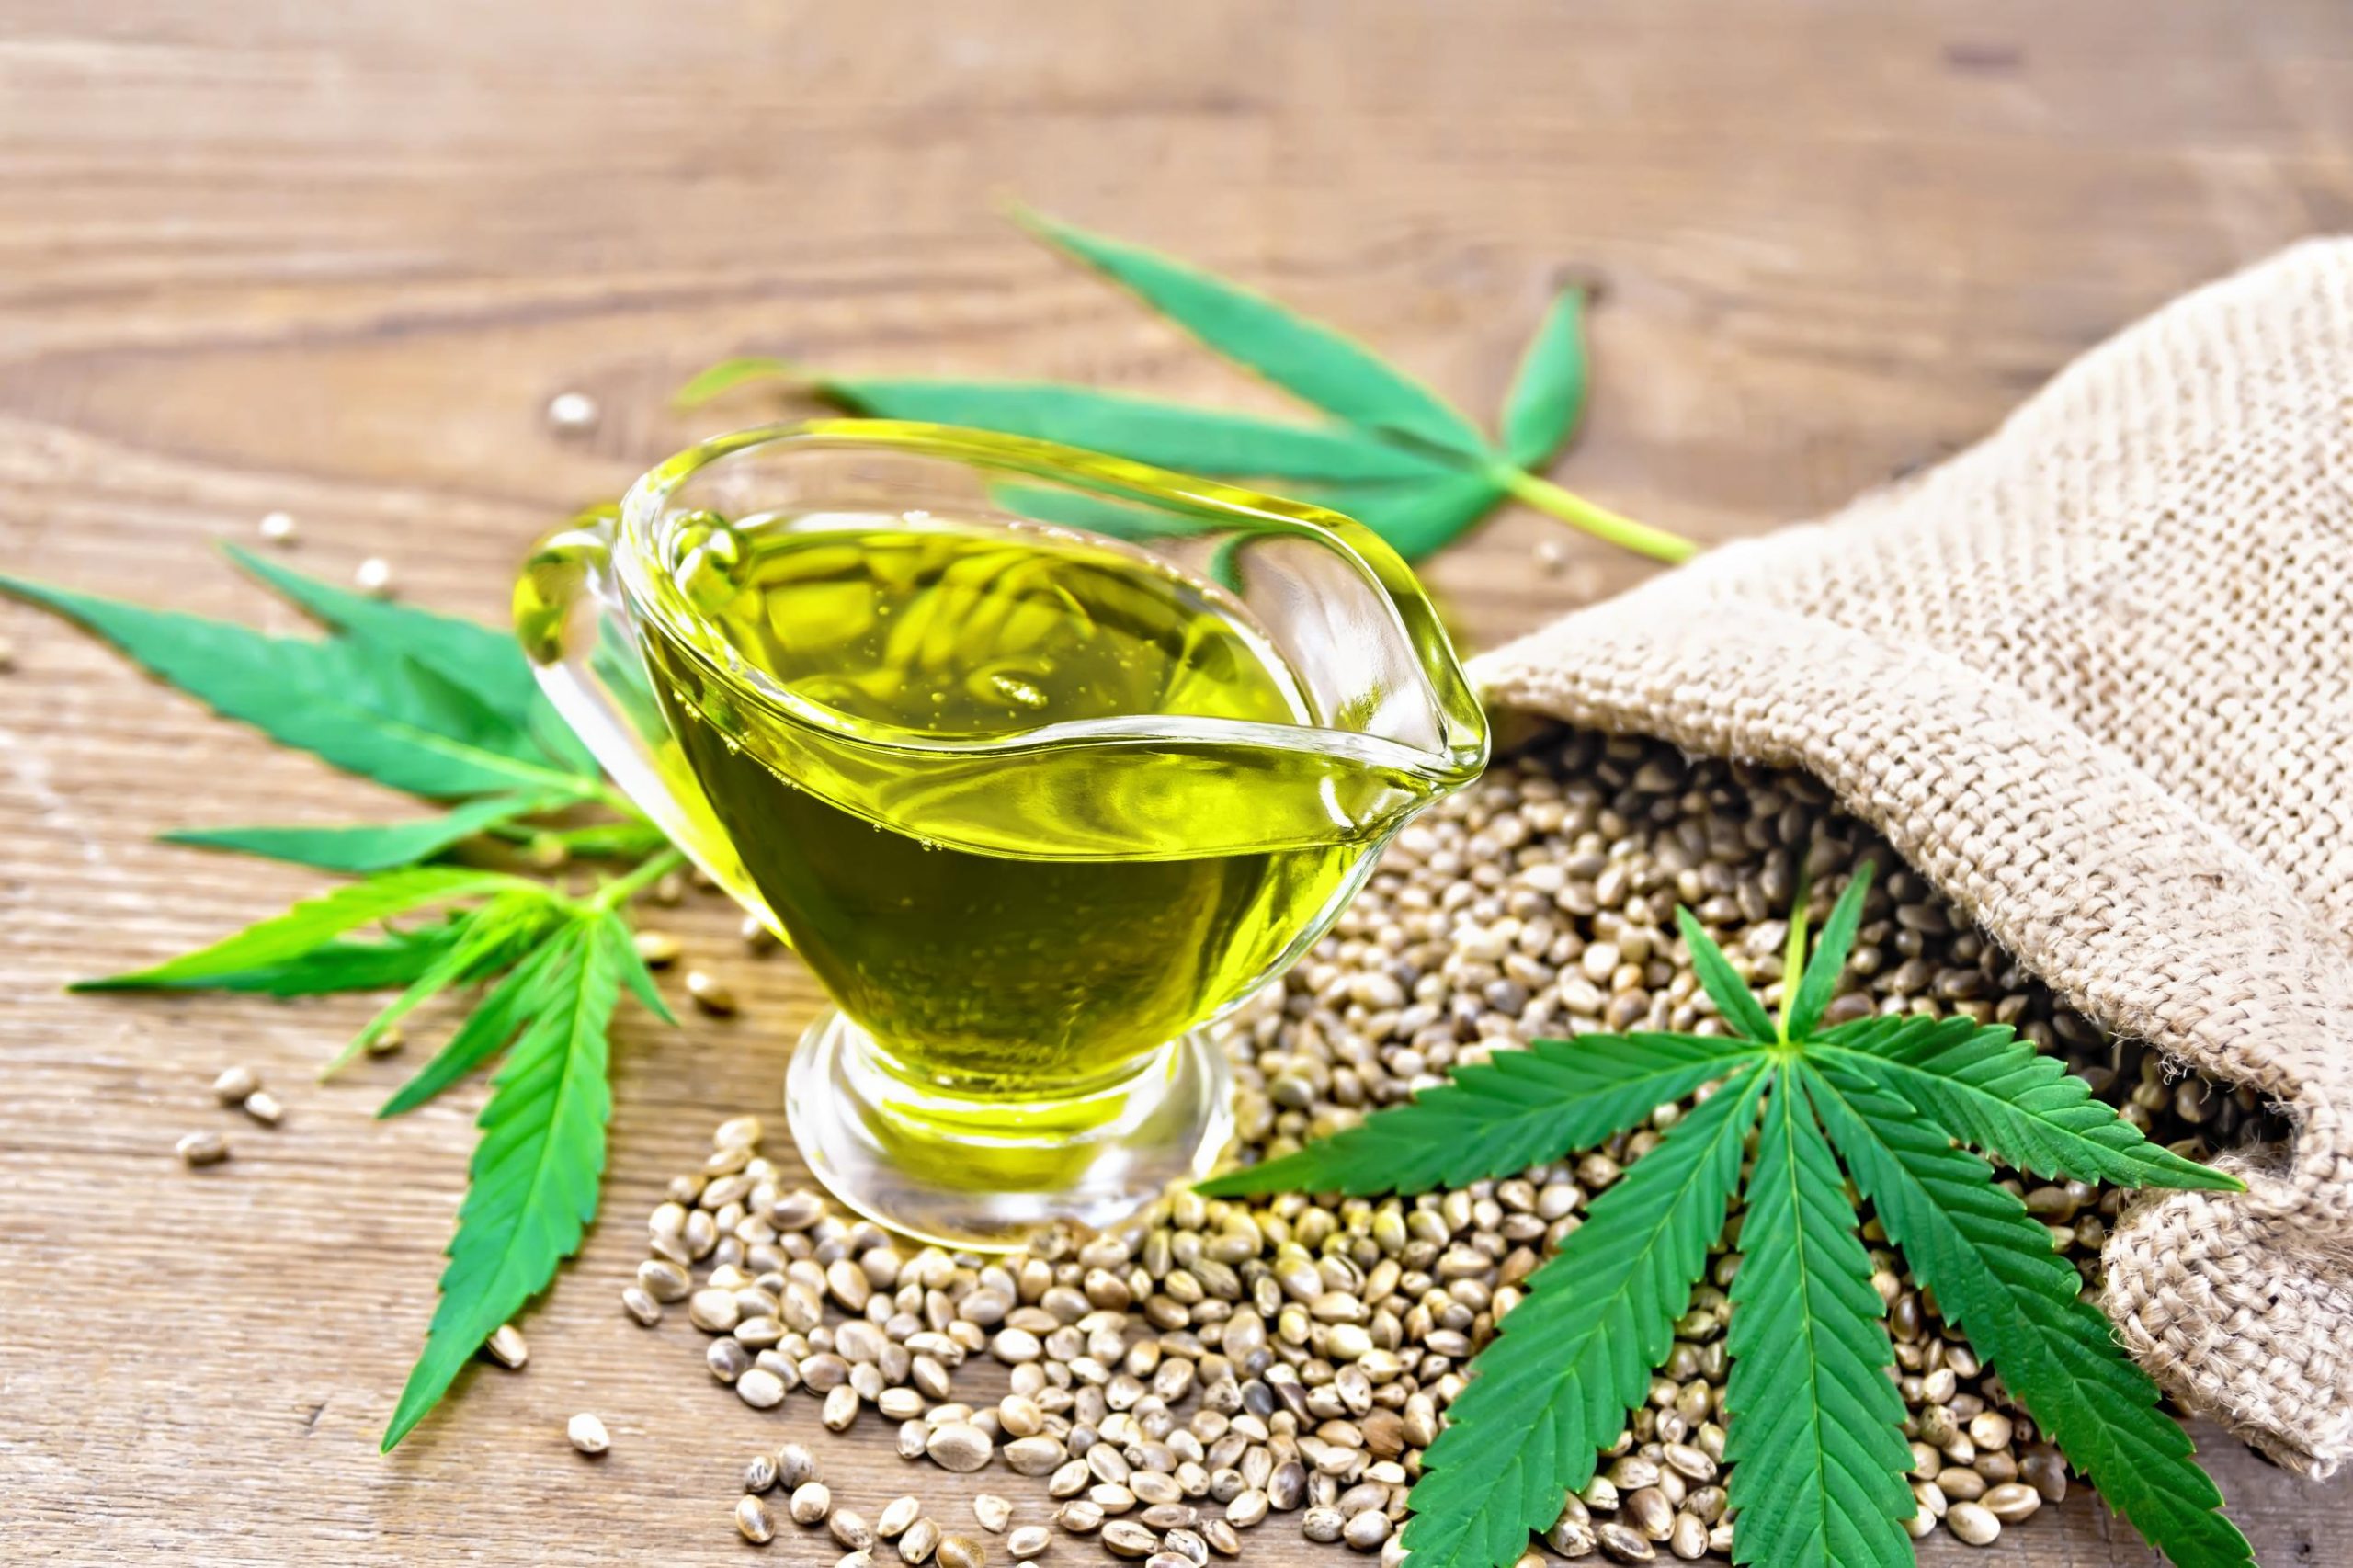 Global CBD Nutraceuticals Market Is Likely To Grow Due To Stiffening Competition Among Companies